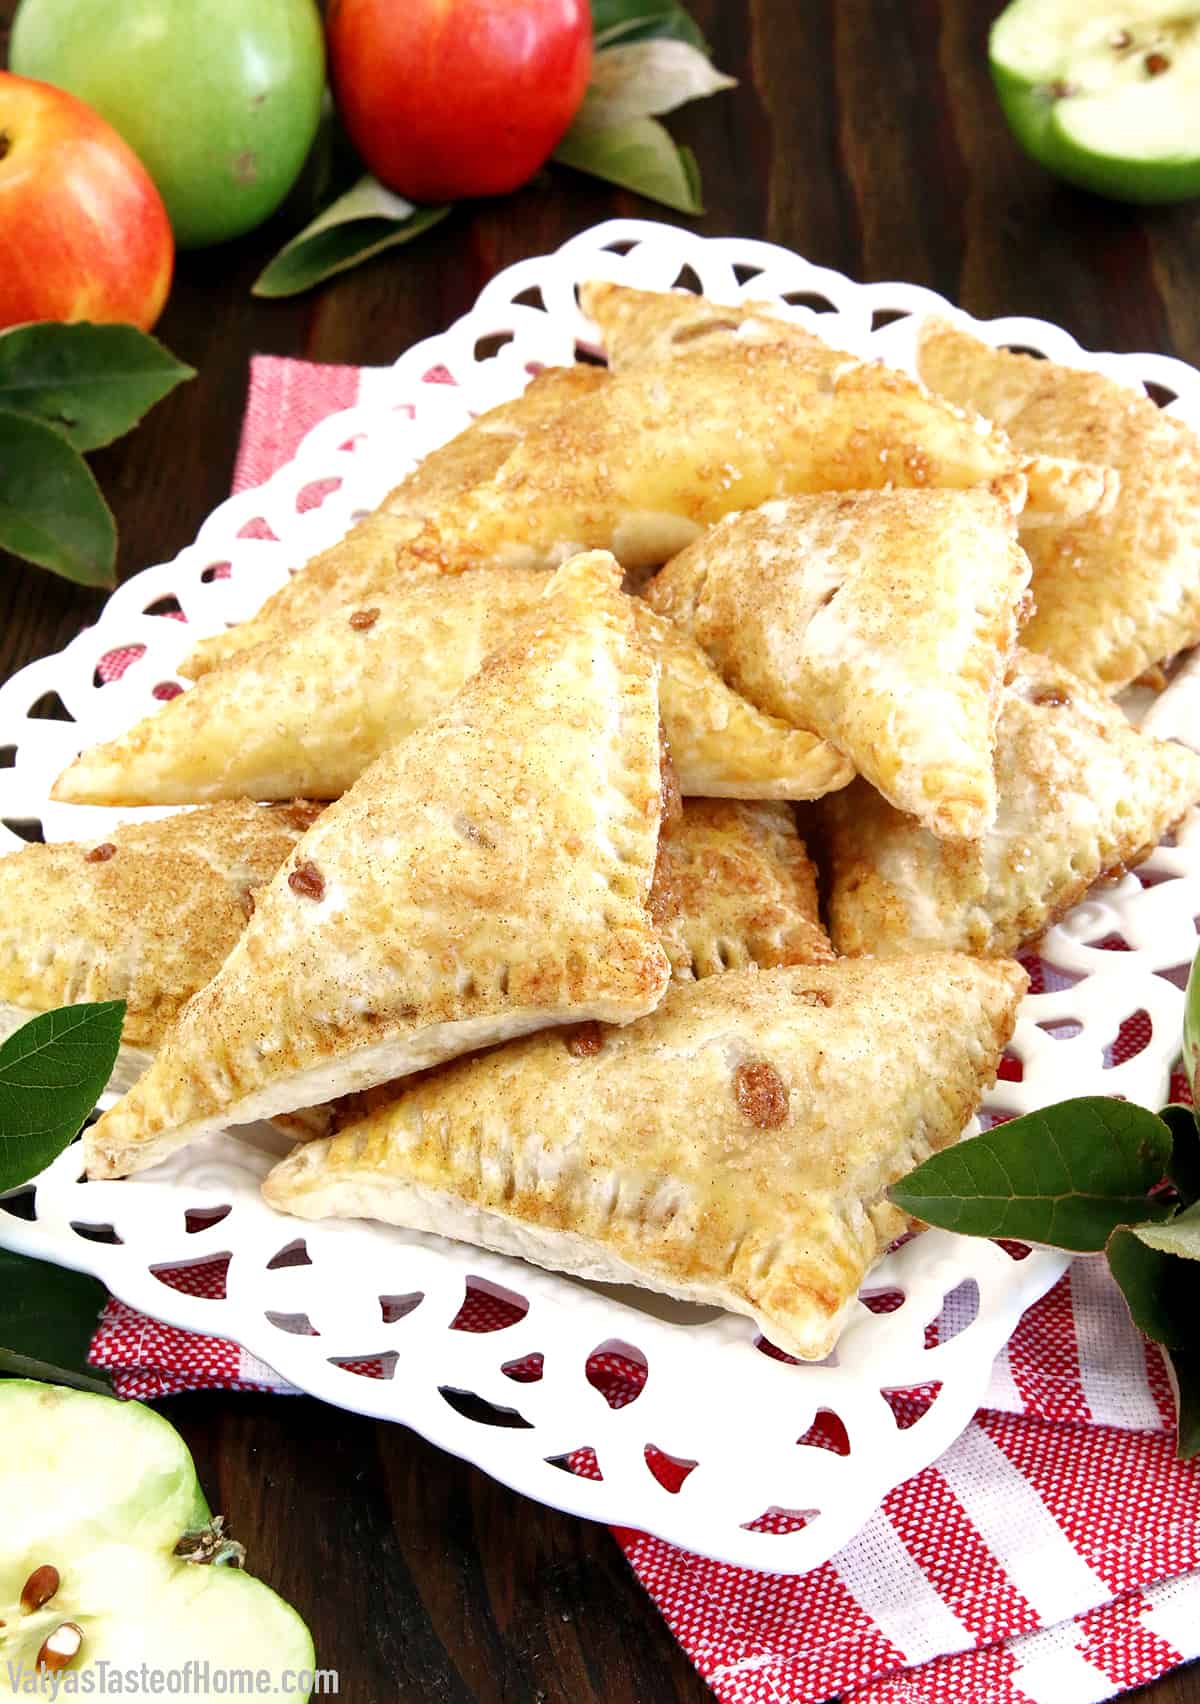 The well-loved flaky puff pastry filled with a simple homemade apple-pie-like filling, and sprinkled with cinnamon sugar makes this treat taste just like the classic apple pie. Minus the hassle of pie making and baking.